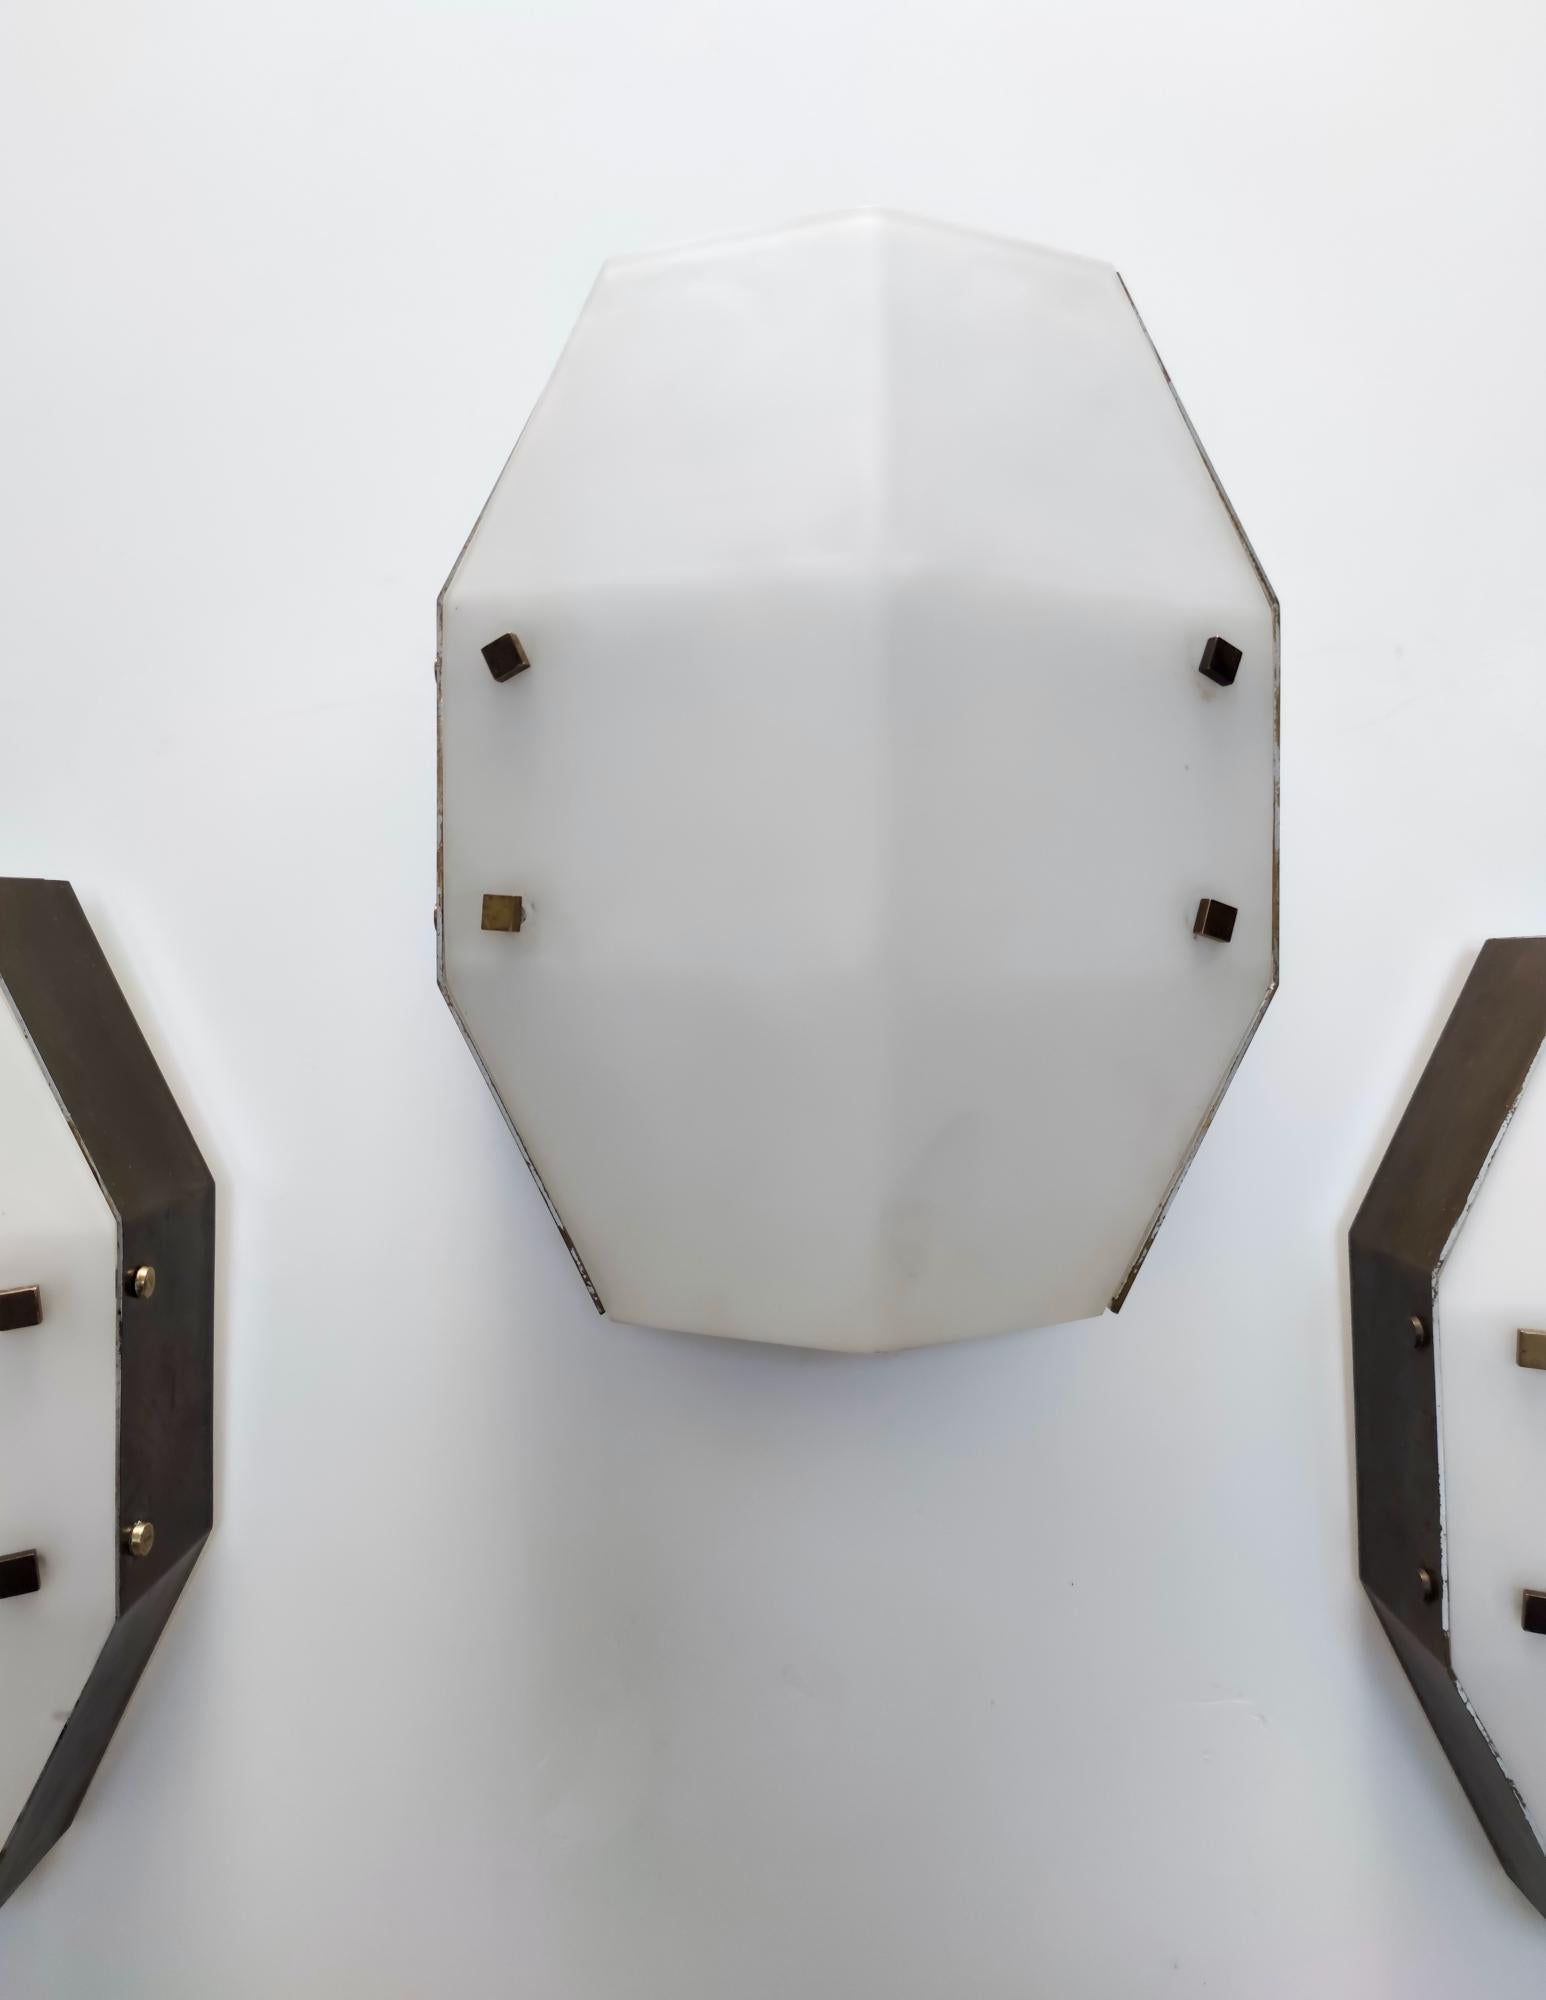 Set of Three Wall Lights by Elio Monesi for Arredoluce Mod. 12880, Italy, 1961 In Good Condition In Bresso, Lombardy